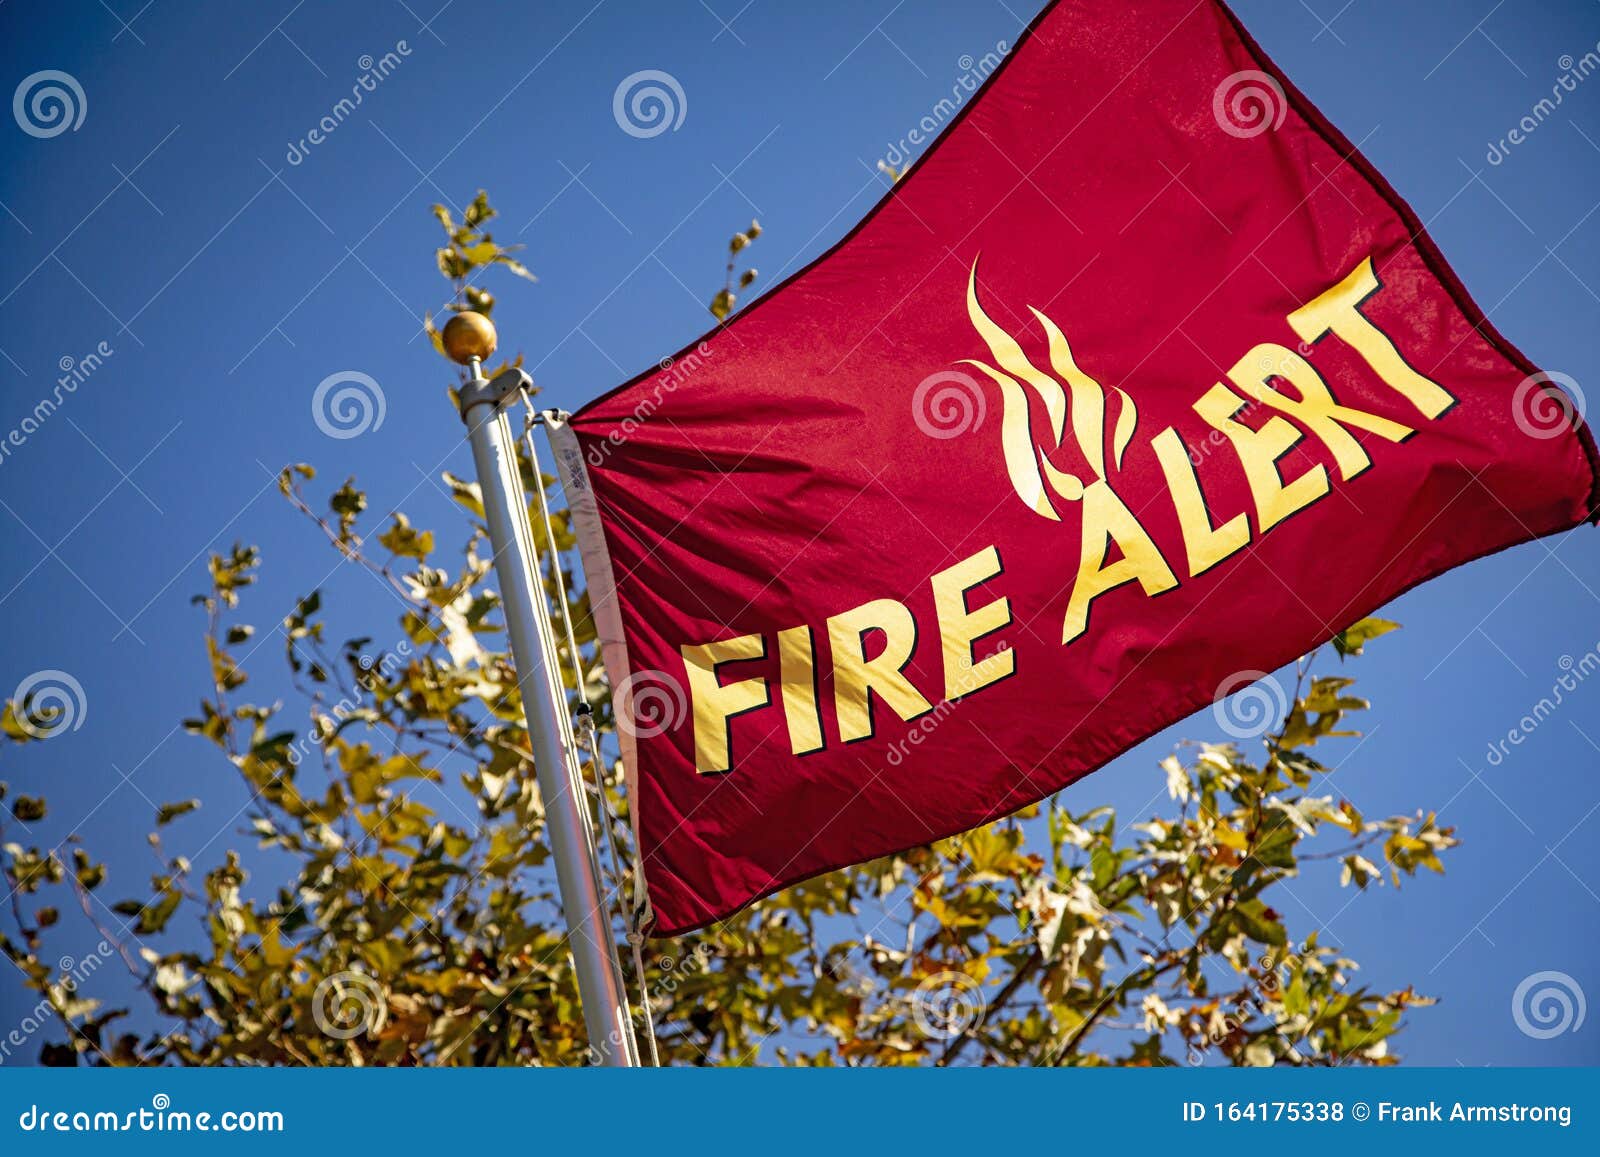 red flag in wind with yellow letters reading `fire alert`